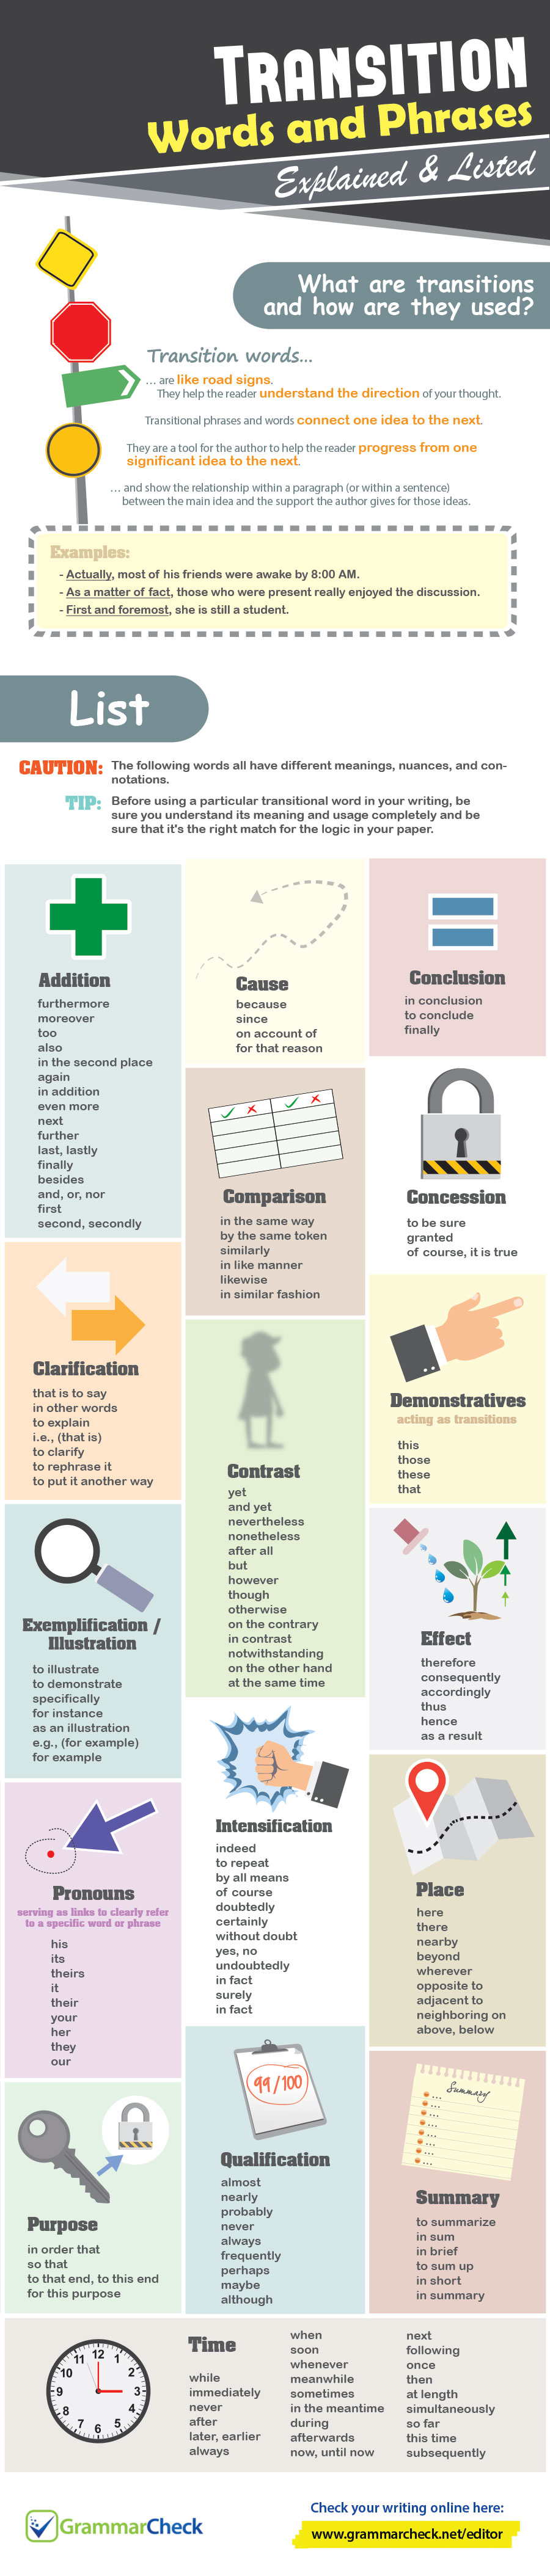 Transition Words and Phrases Explained & Listed (Infographic)